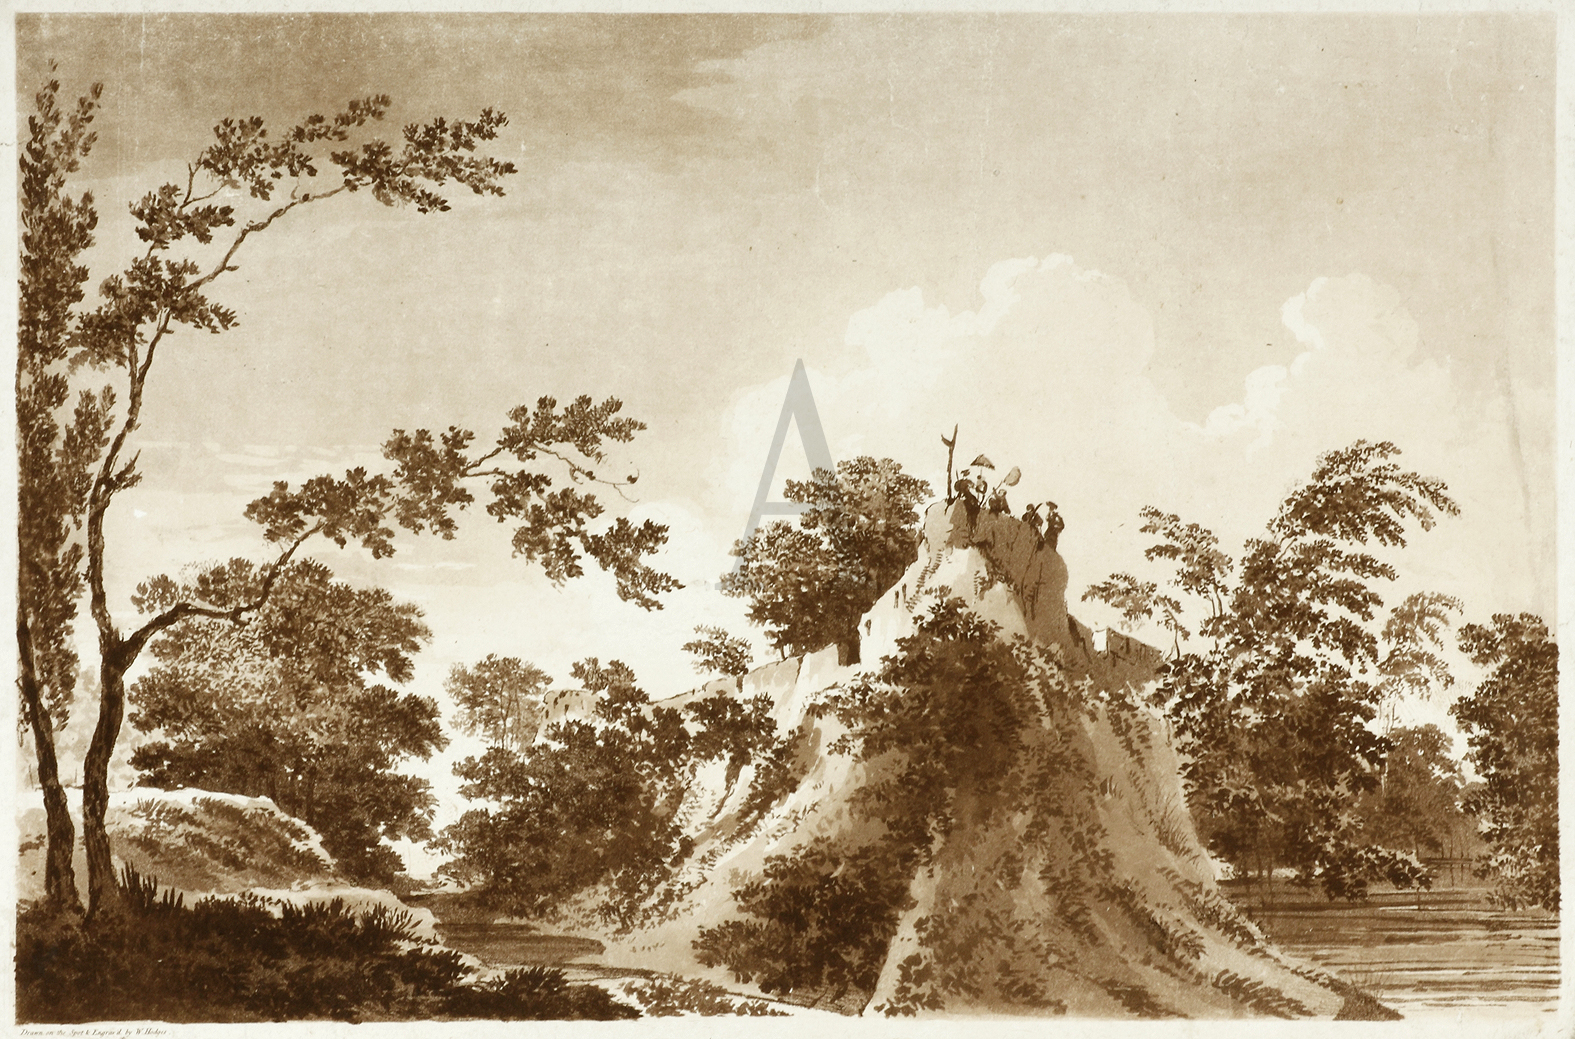 A View of the Fort of Peteter. - Antique View from 1788